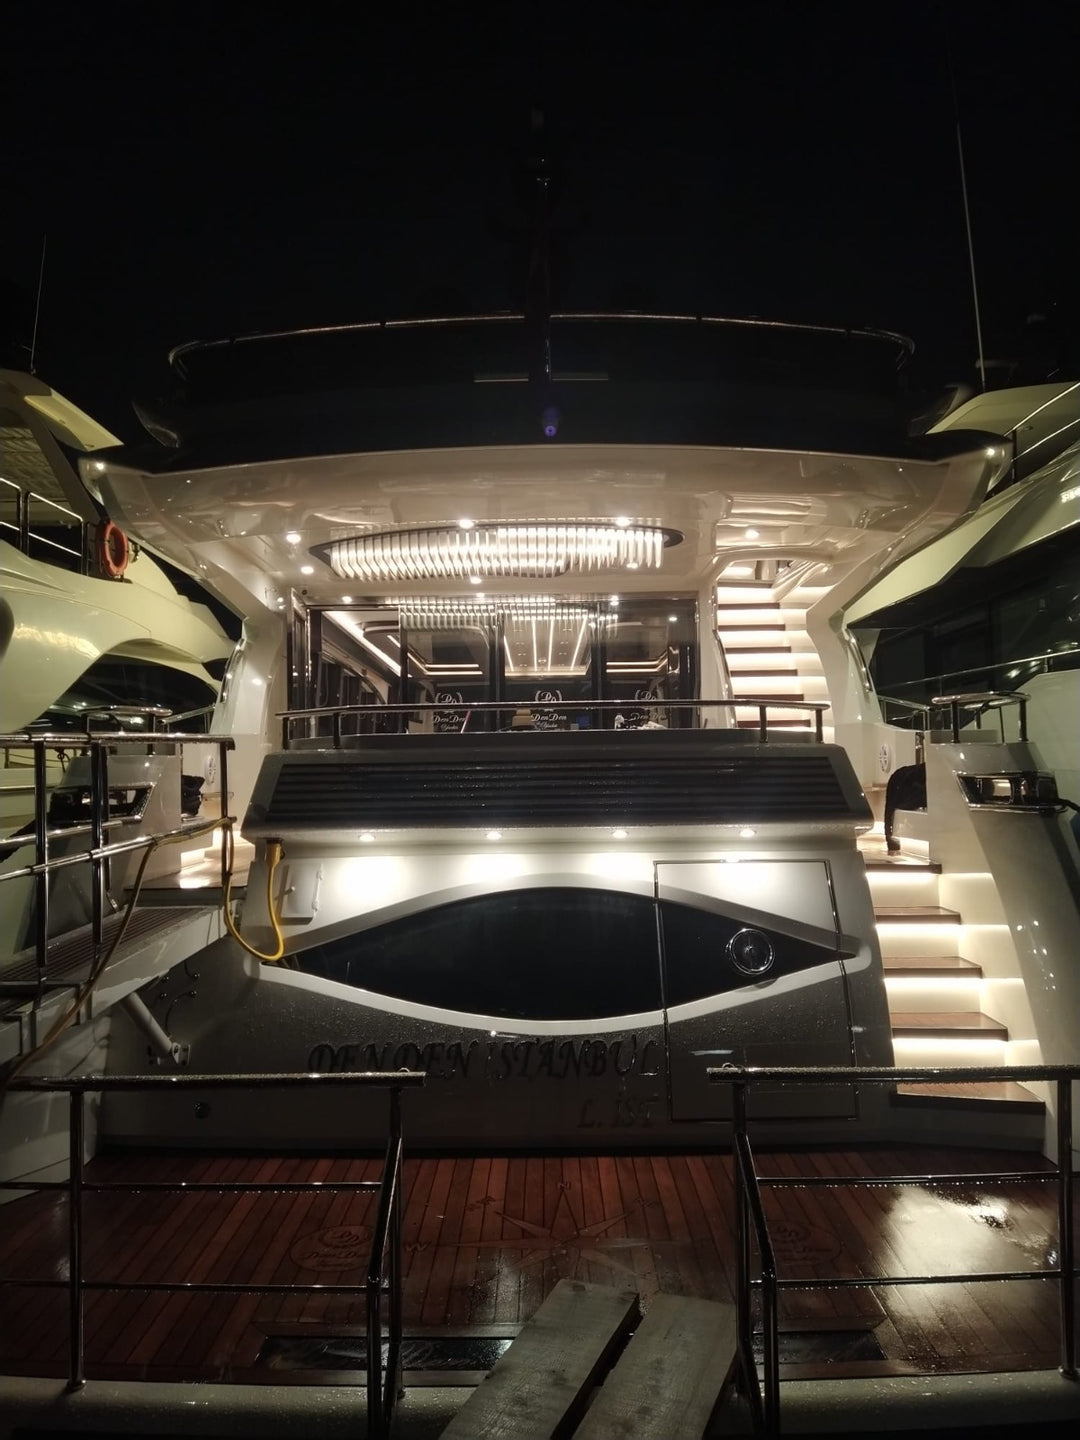 Relax in the cool, air-conditioned comfort of our yacht's cabin while cruising Istanbul's waters.